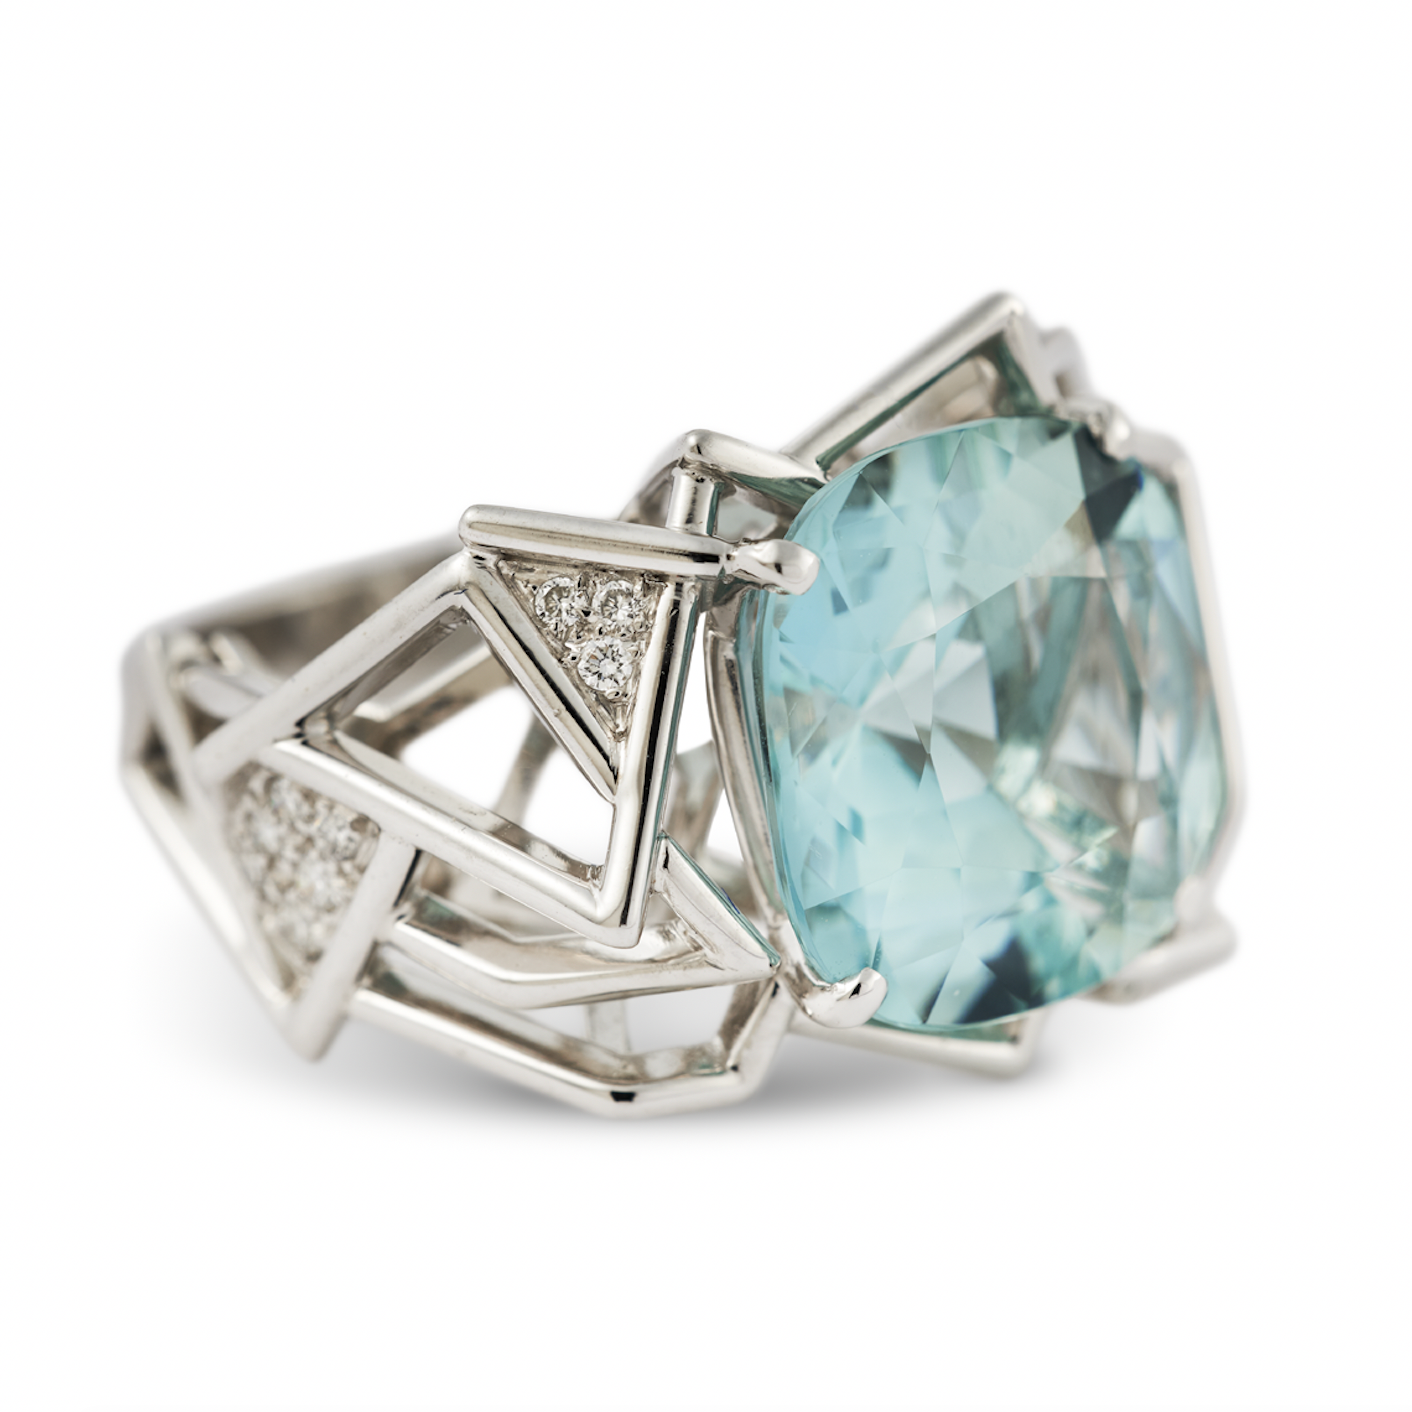 The first piece Amy designed, this aquamarine ring from her Disorient Collection